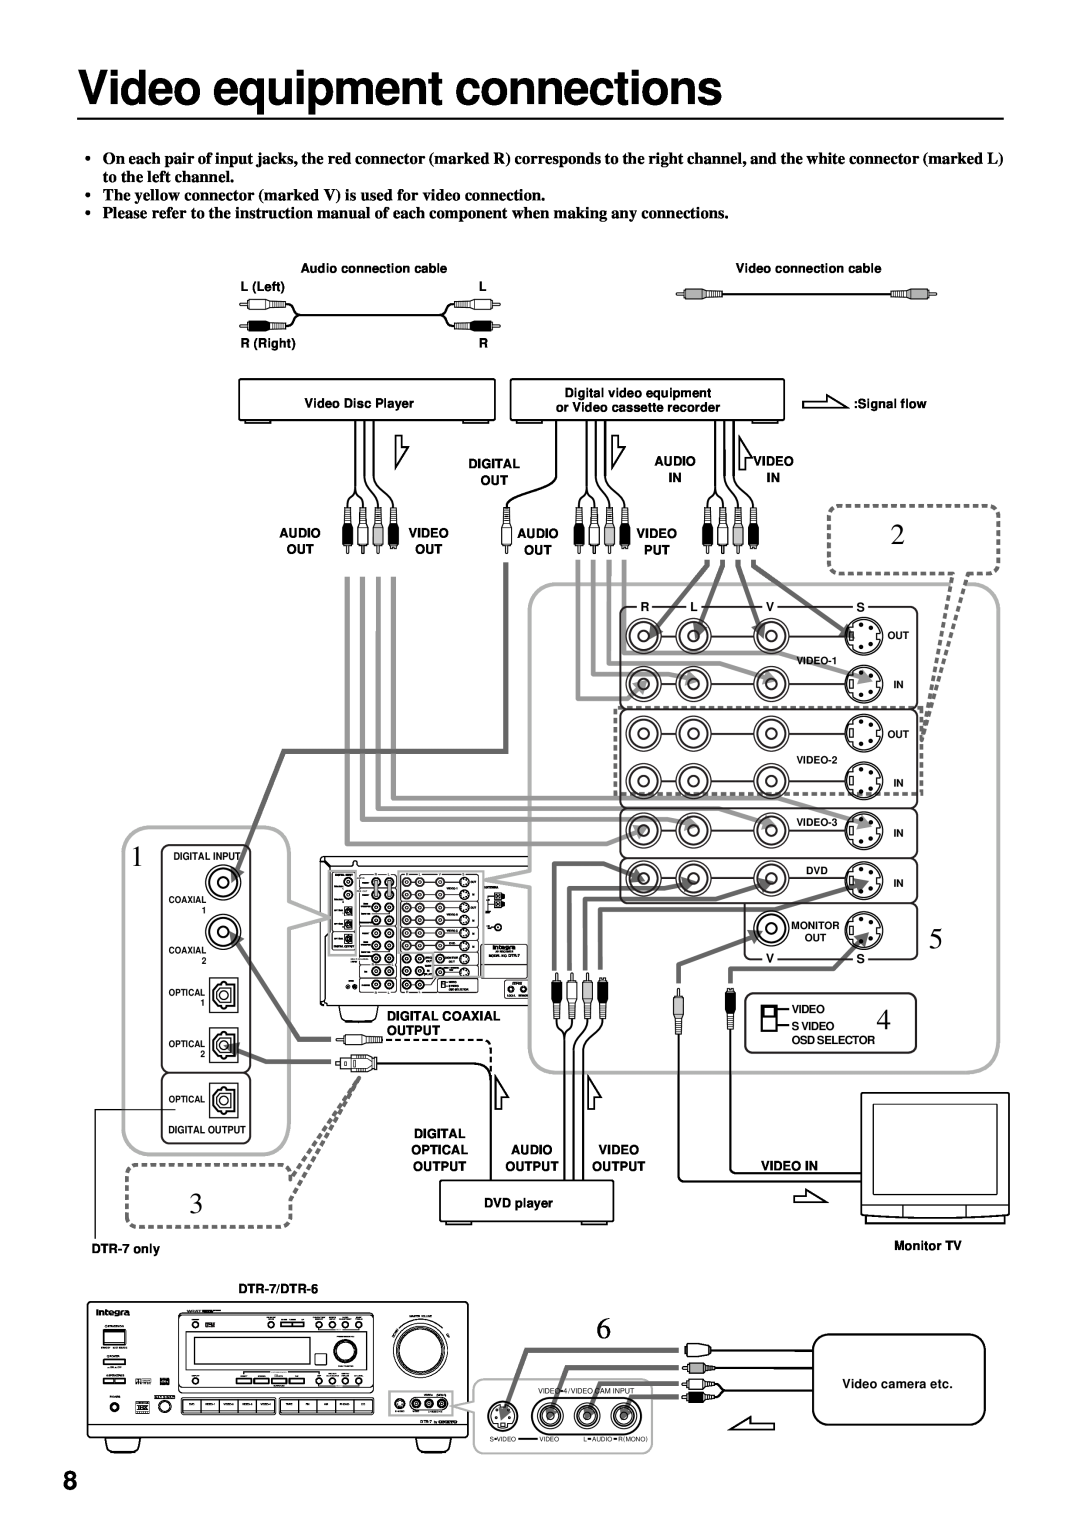 Integra DTR-7 instruction manual Video equipment connections 